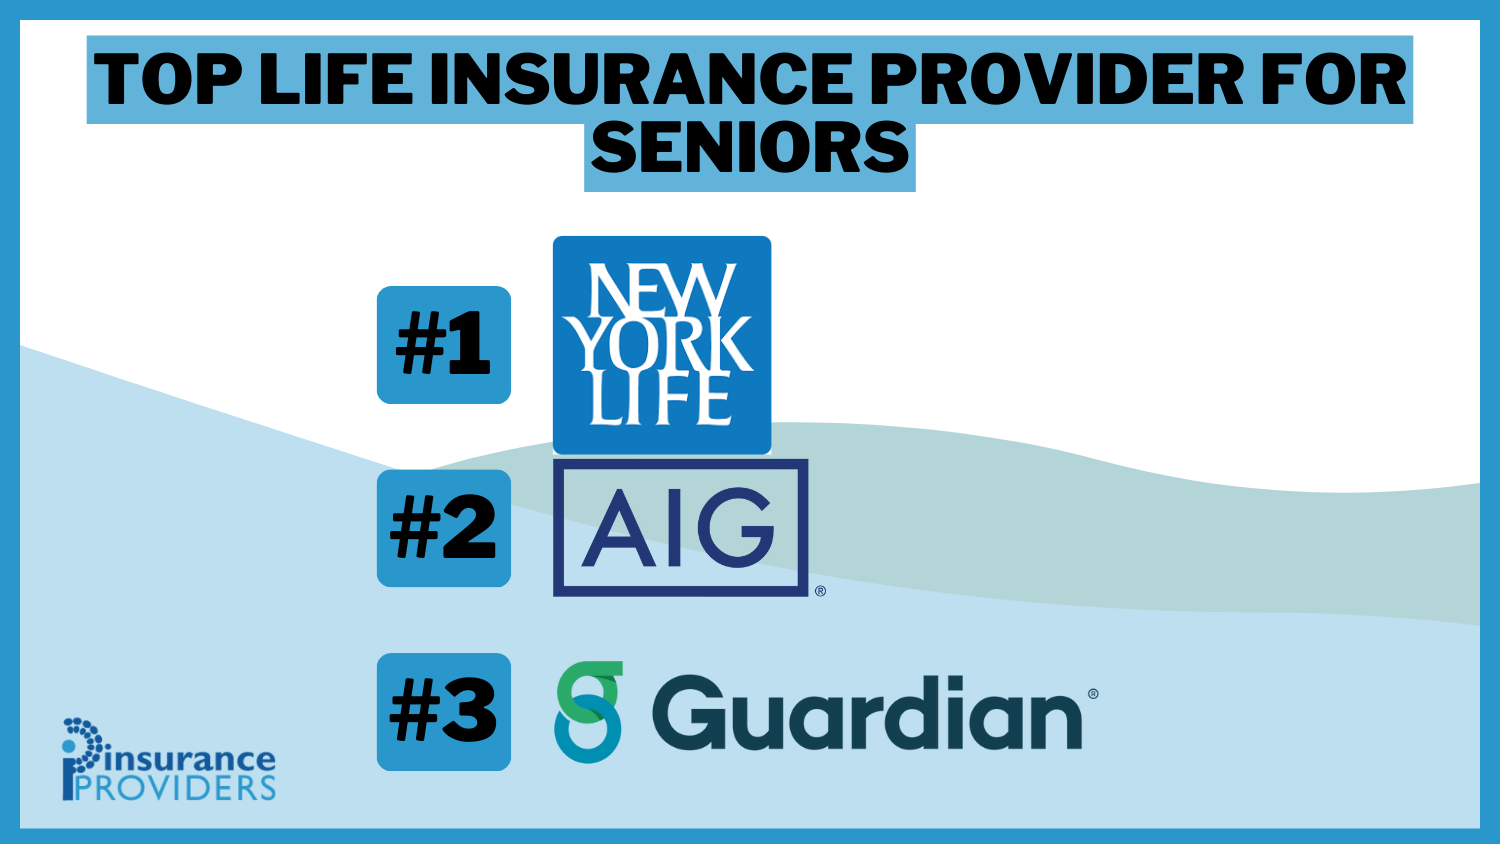 Top Life Insurance Provider for Seniors: New York Life, AIG and Guardian